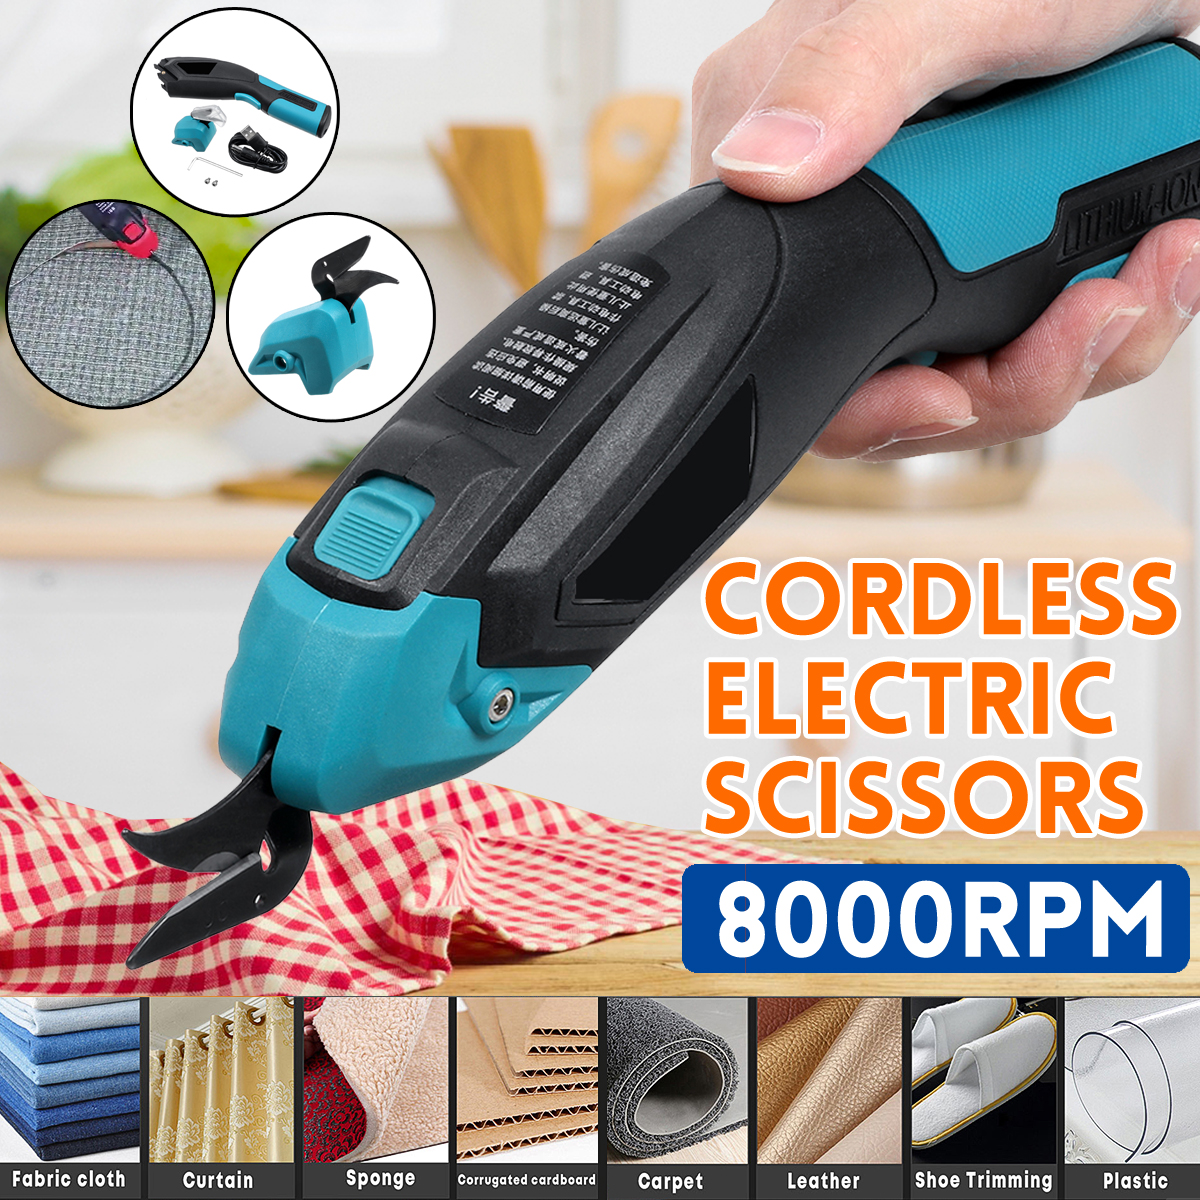 DC-4V-Portable-Cordless-Electric-Scissors-Leather-Fabric-Crafts-Cutter-Cutting-Tool-1733406-1